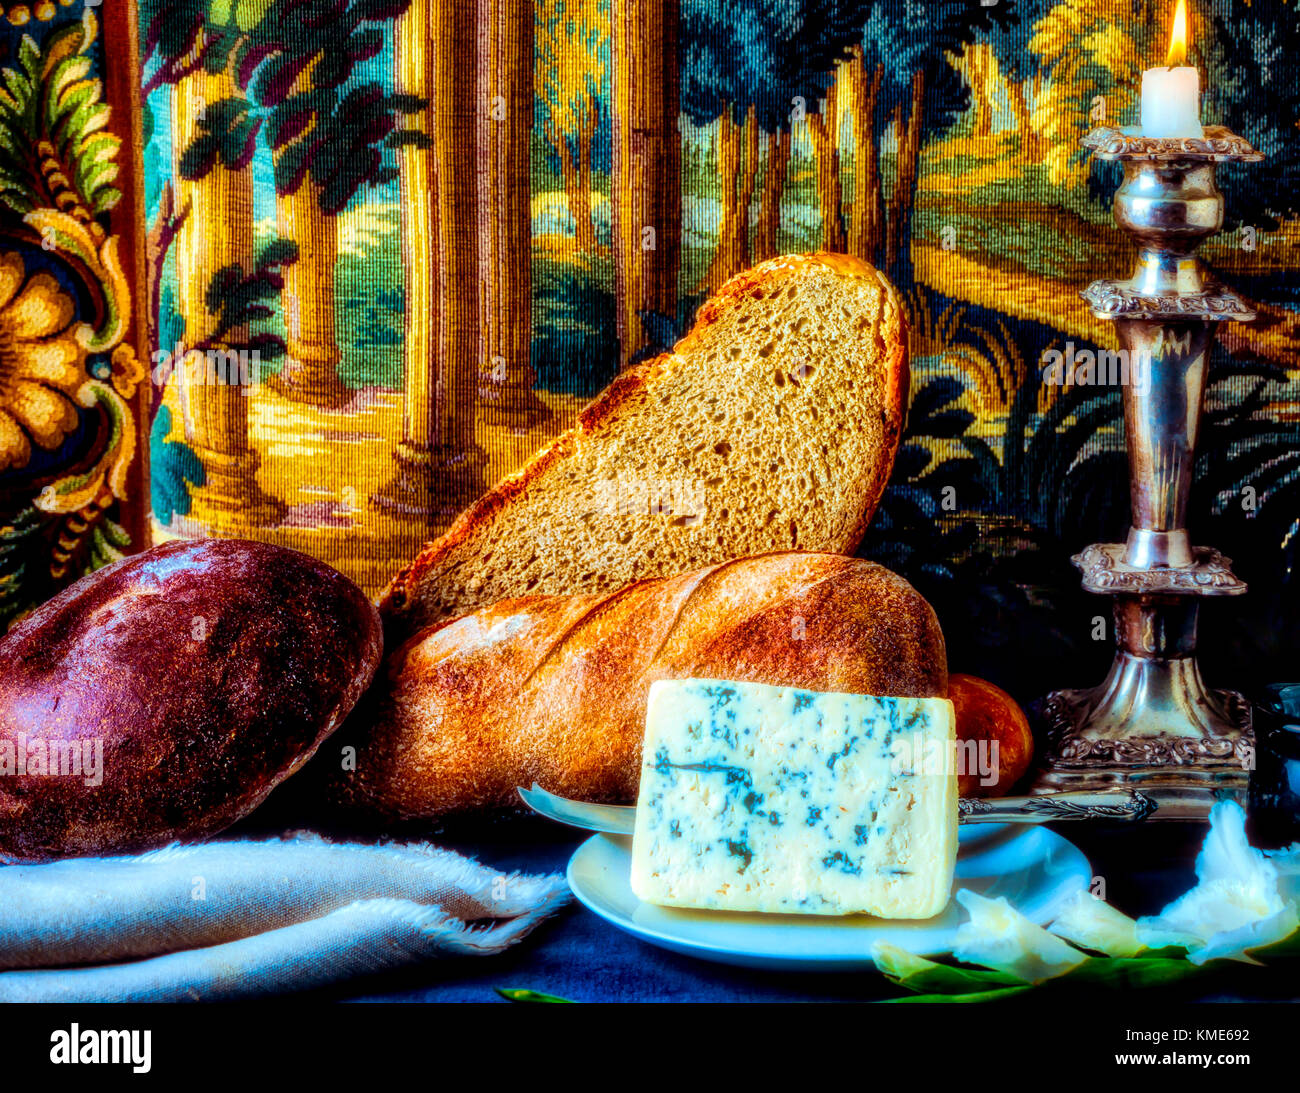 Bread And Cheese Still Life Stock Photo